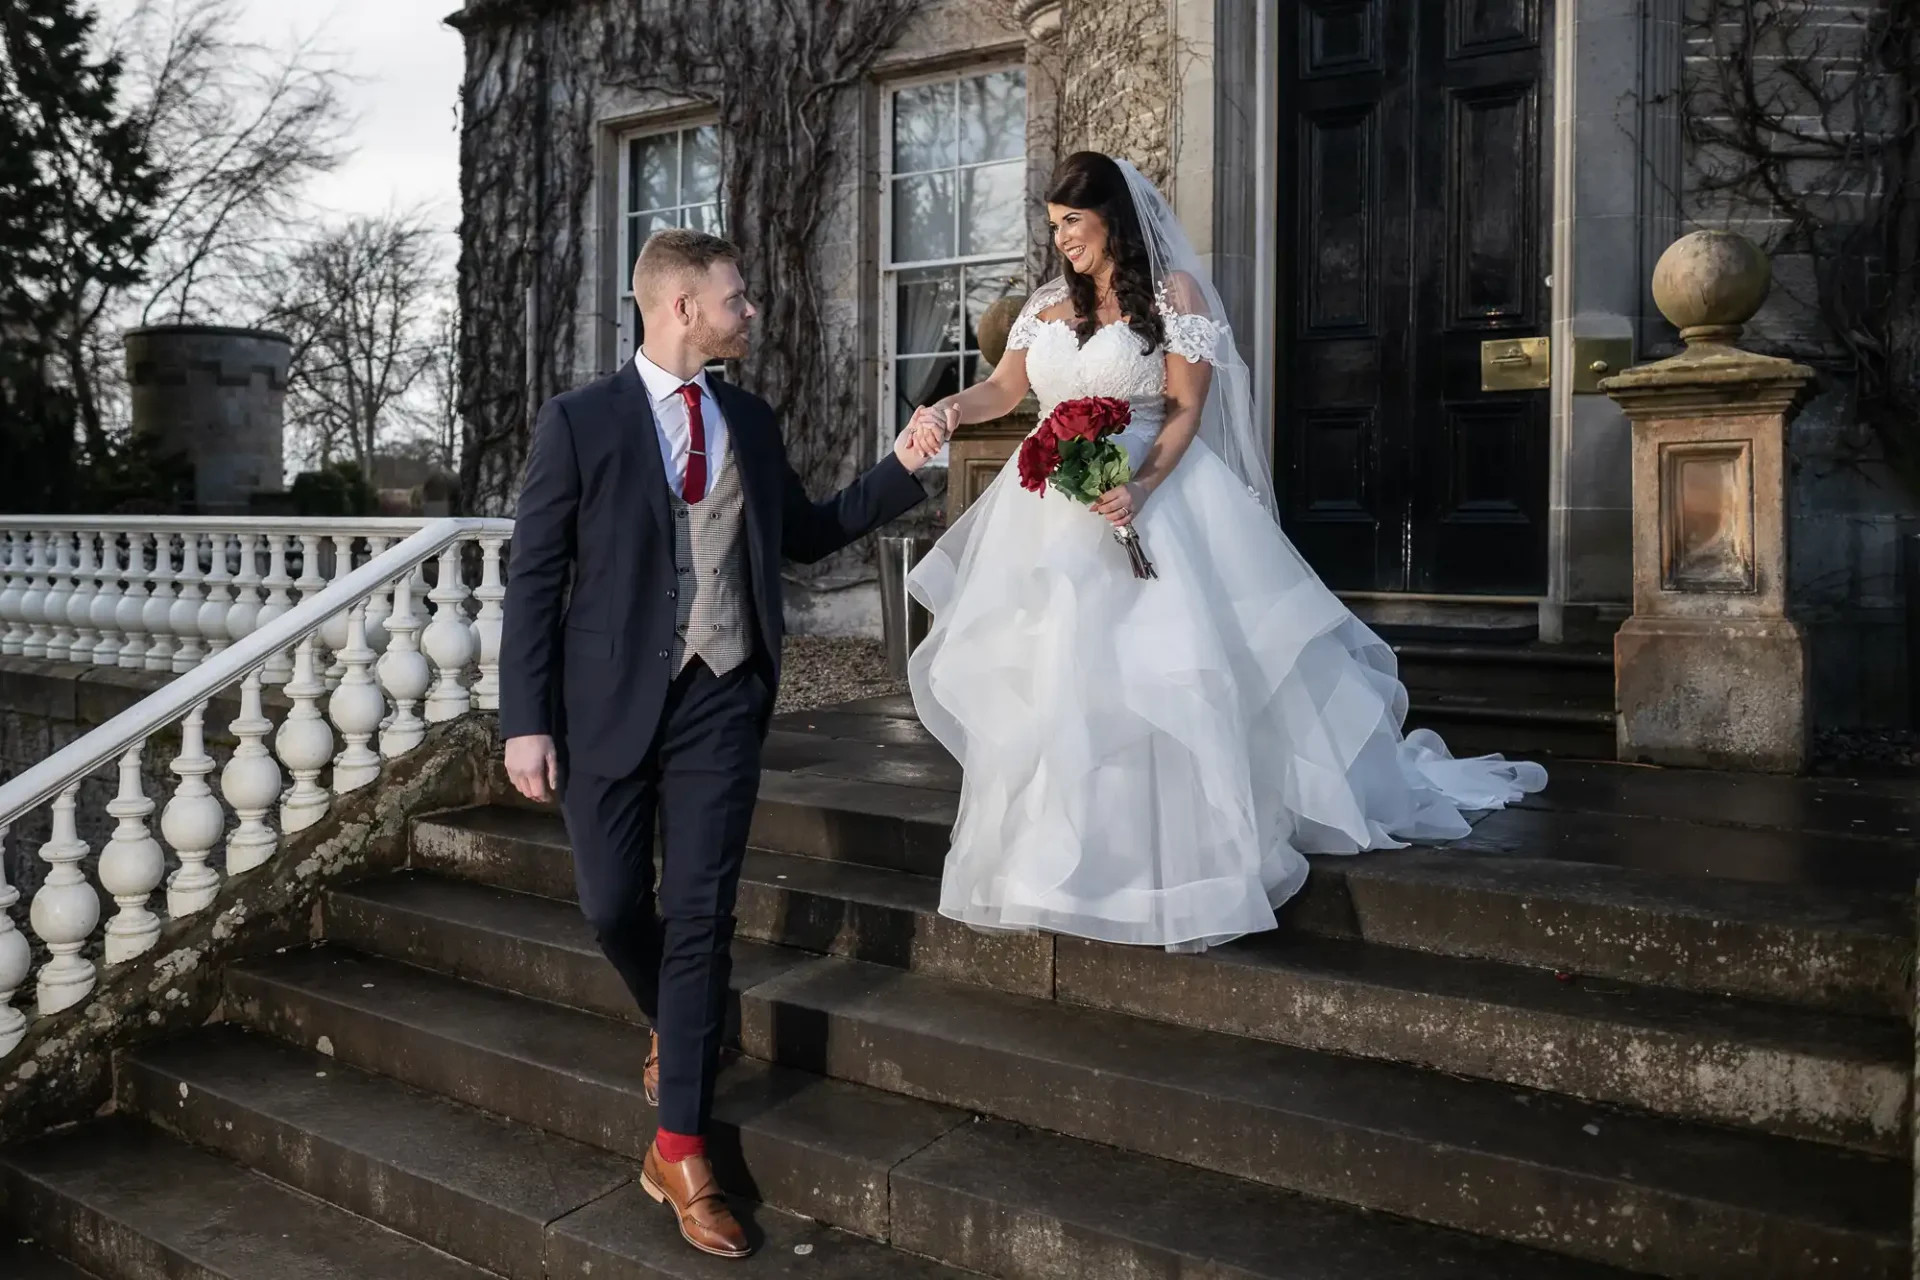 A bride in a white dress and a groom in a blue suit with brown shoes holding hands on the steps of an old mansion.